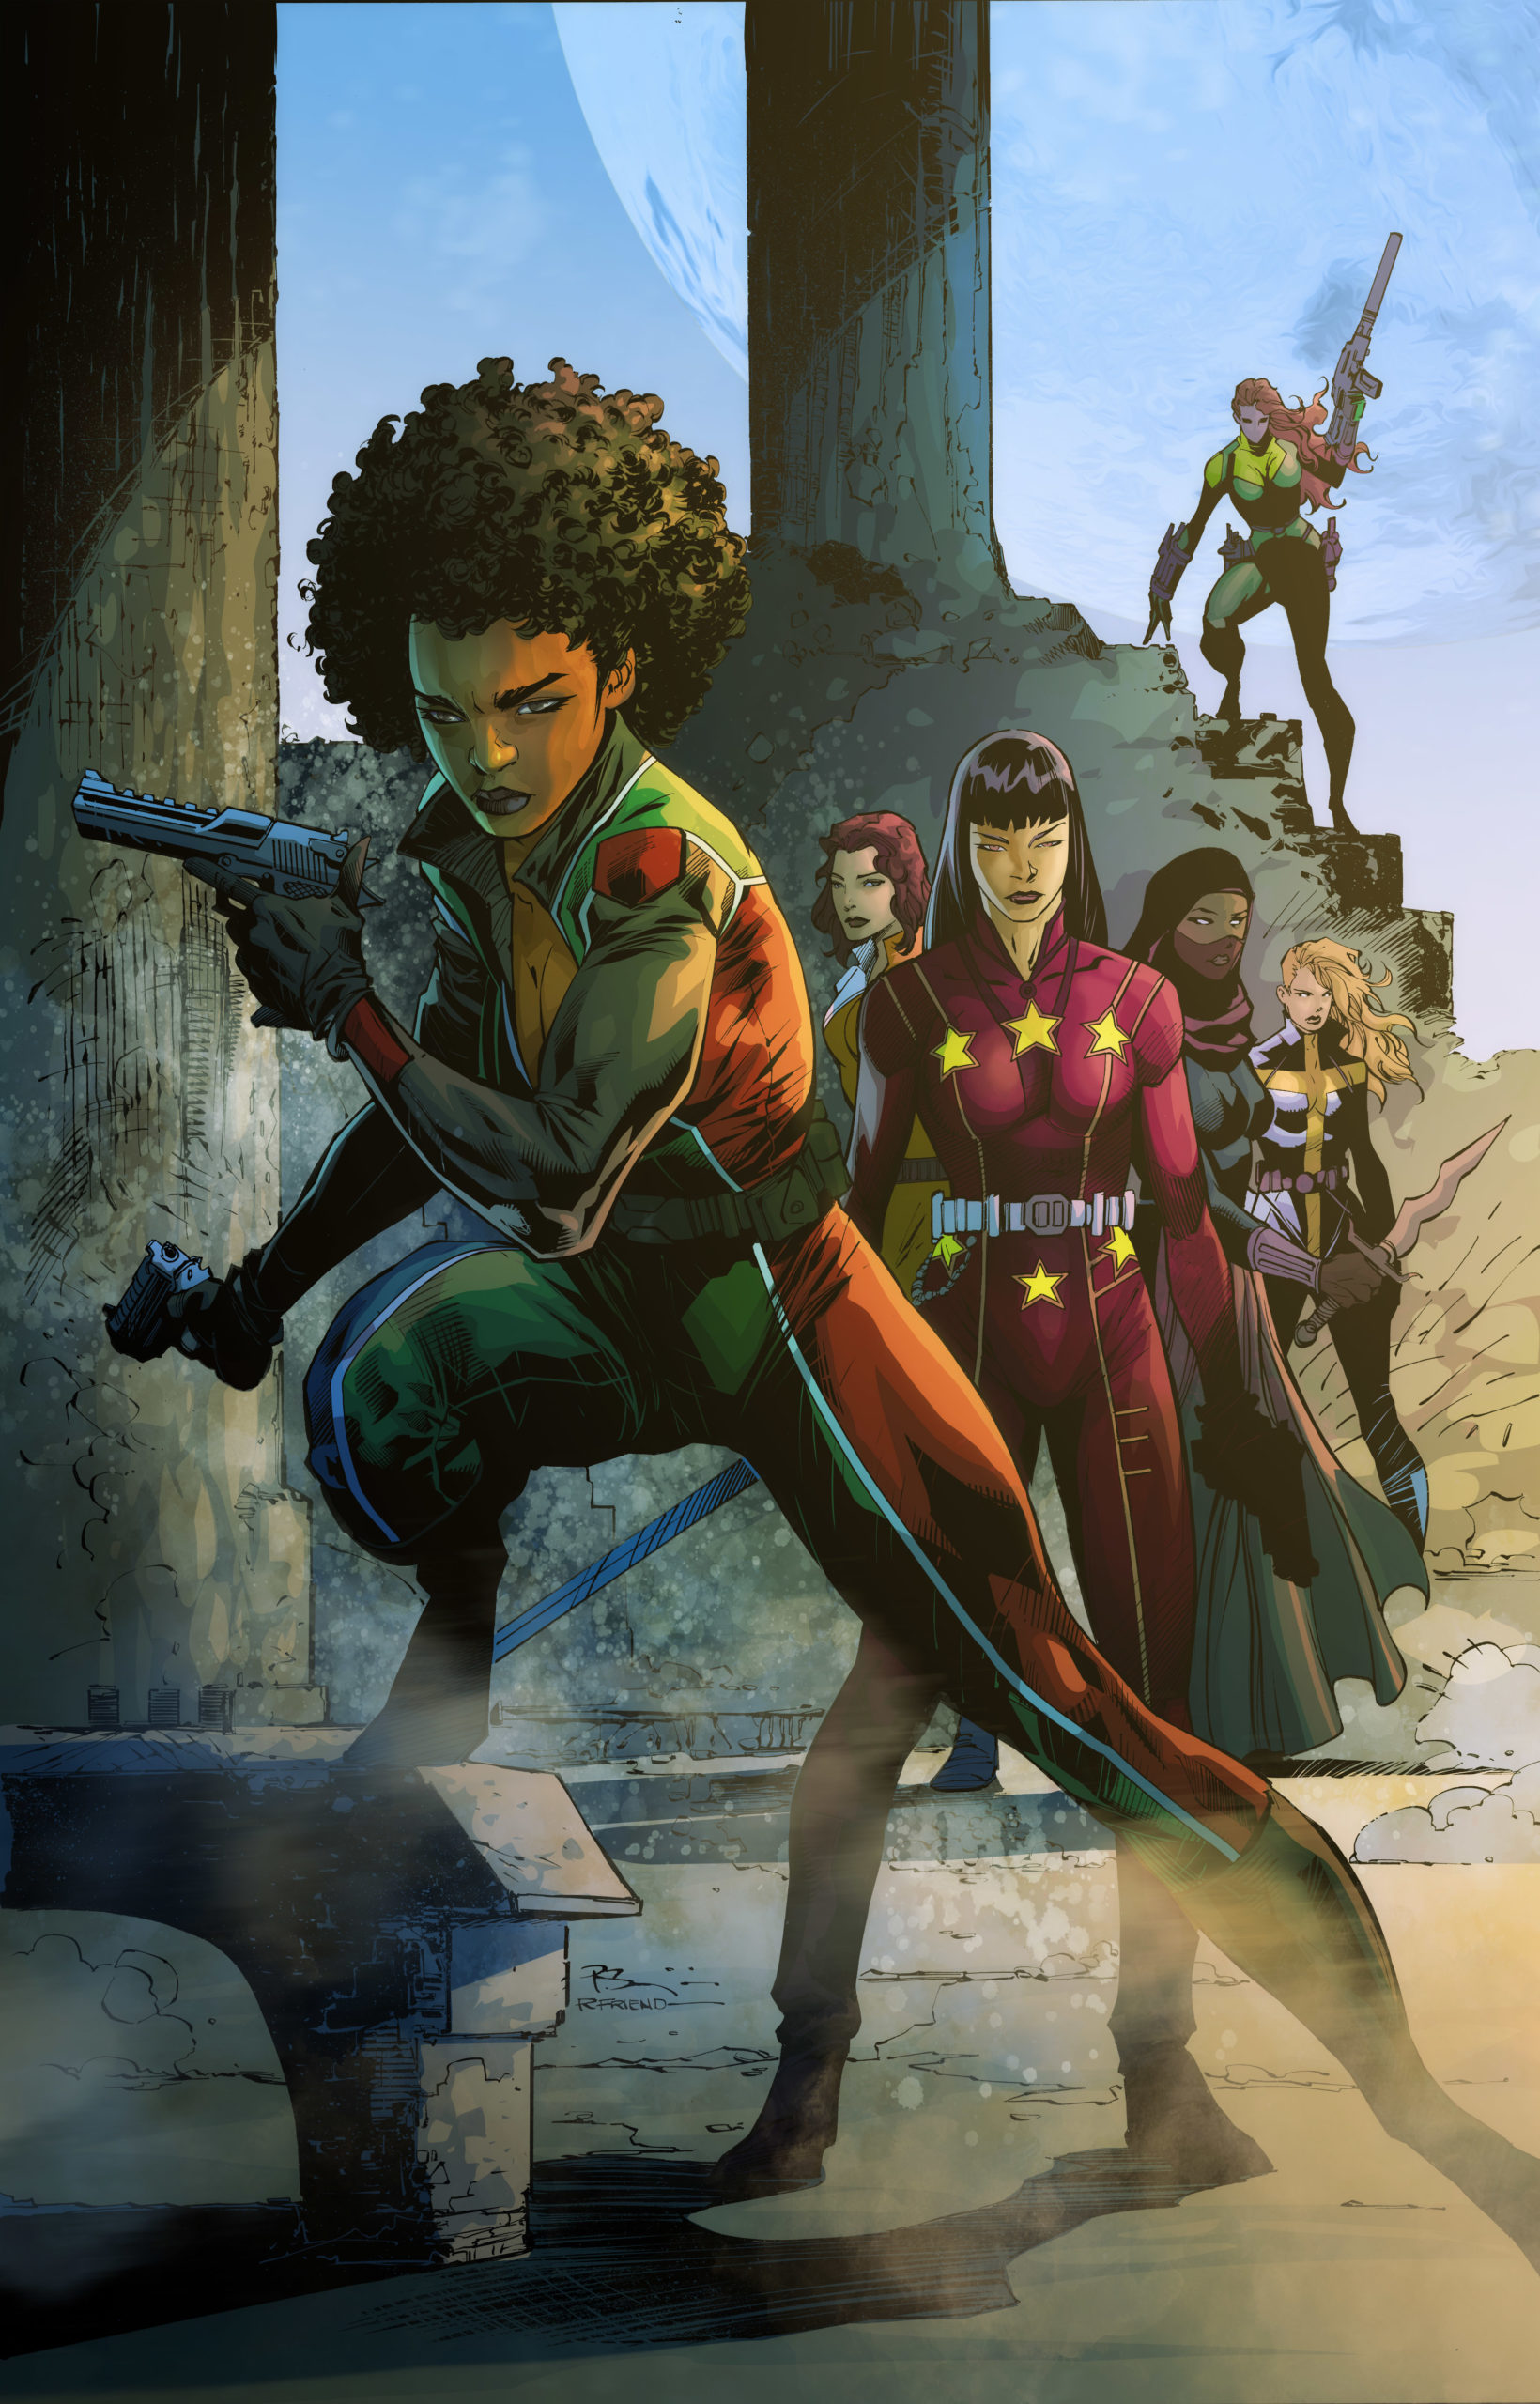 We Finally Have Details On The Rebirth Of Milestone Media’s Multicultural Superhero Universe 